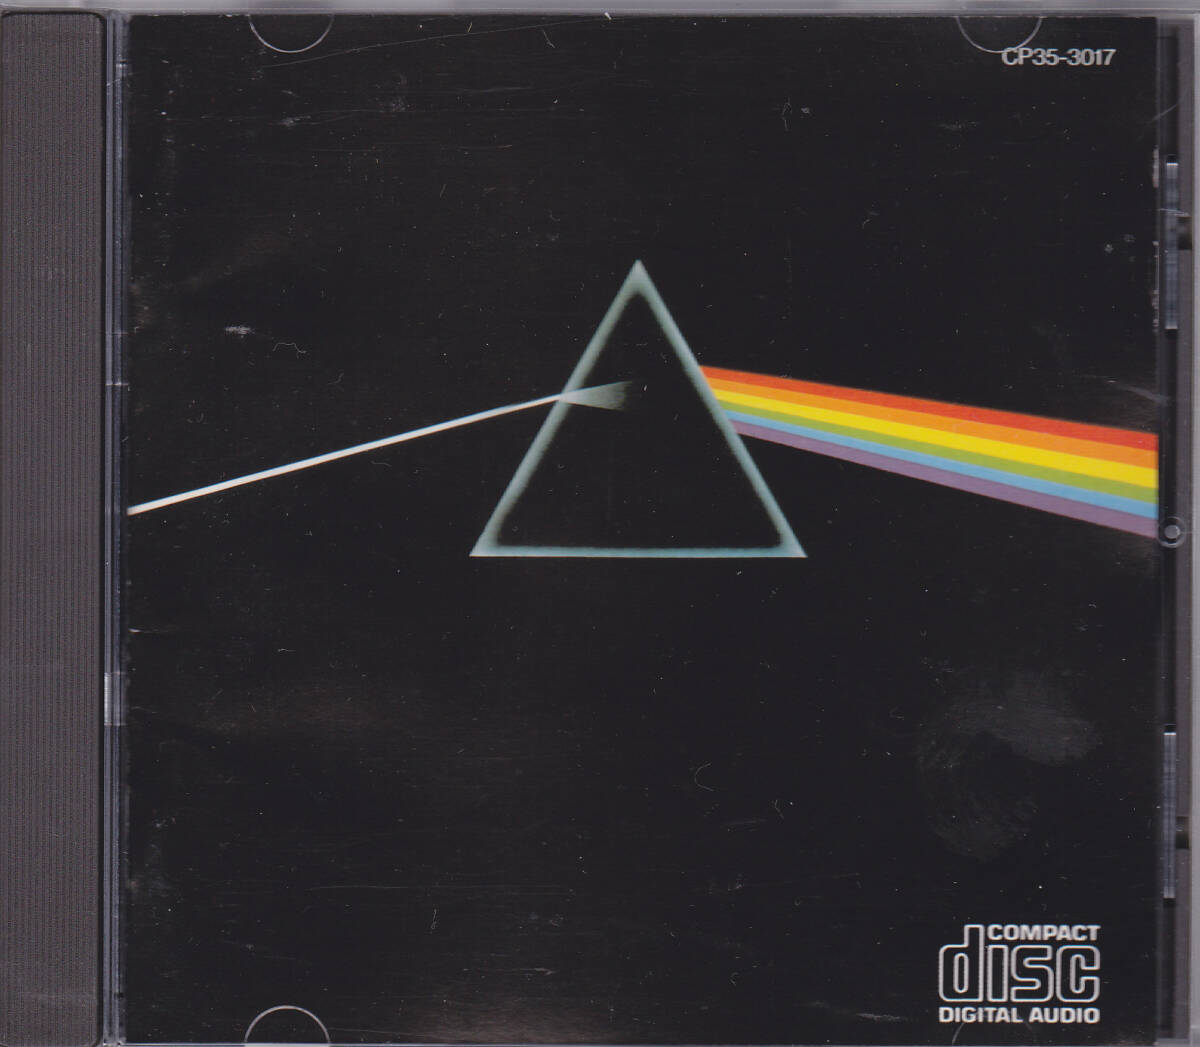 CD ピンク・フロイド - 狂気 - 旧規格 CP35-3017-U 1A4 TO PINK FLOYD THE DARK SIDE OF THE MOON 3500円盤 税表記なし_画像1